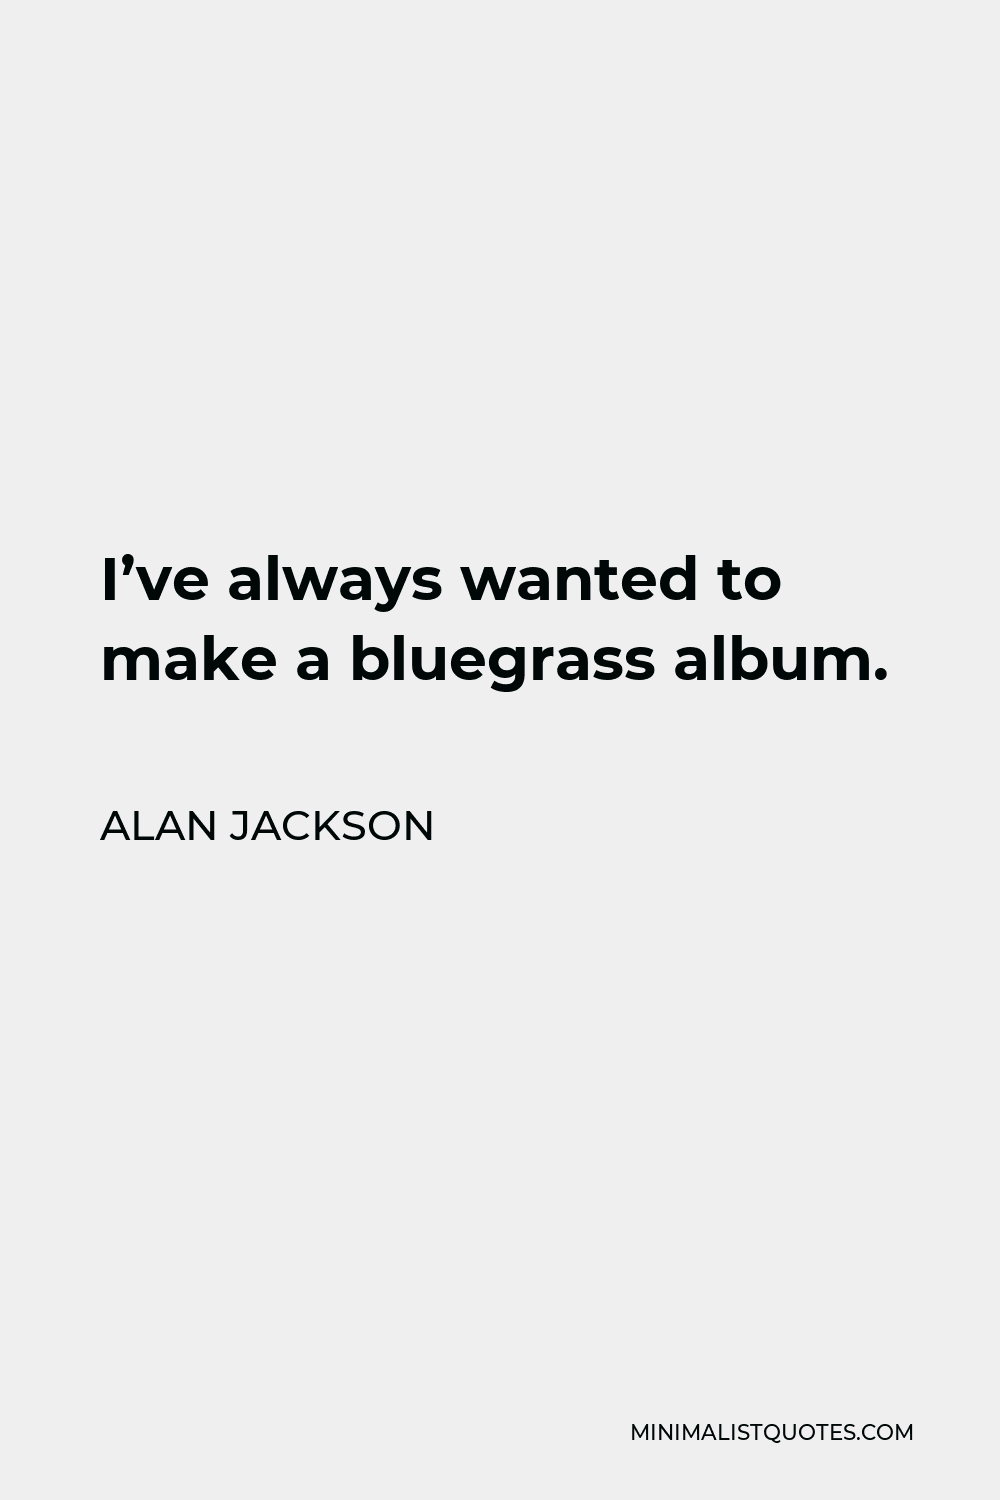 Alan Jackson Quote - I’ve always wanted to make a bluegrass album.